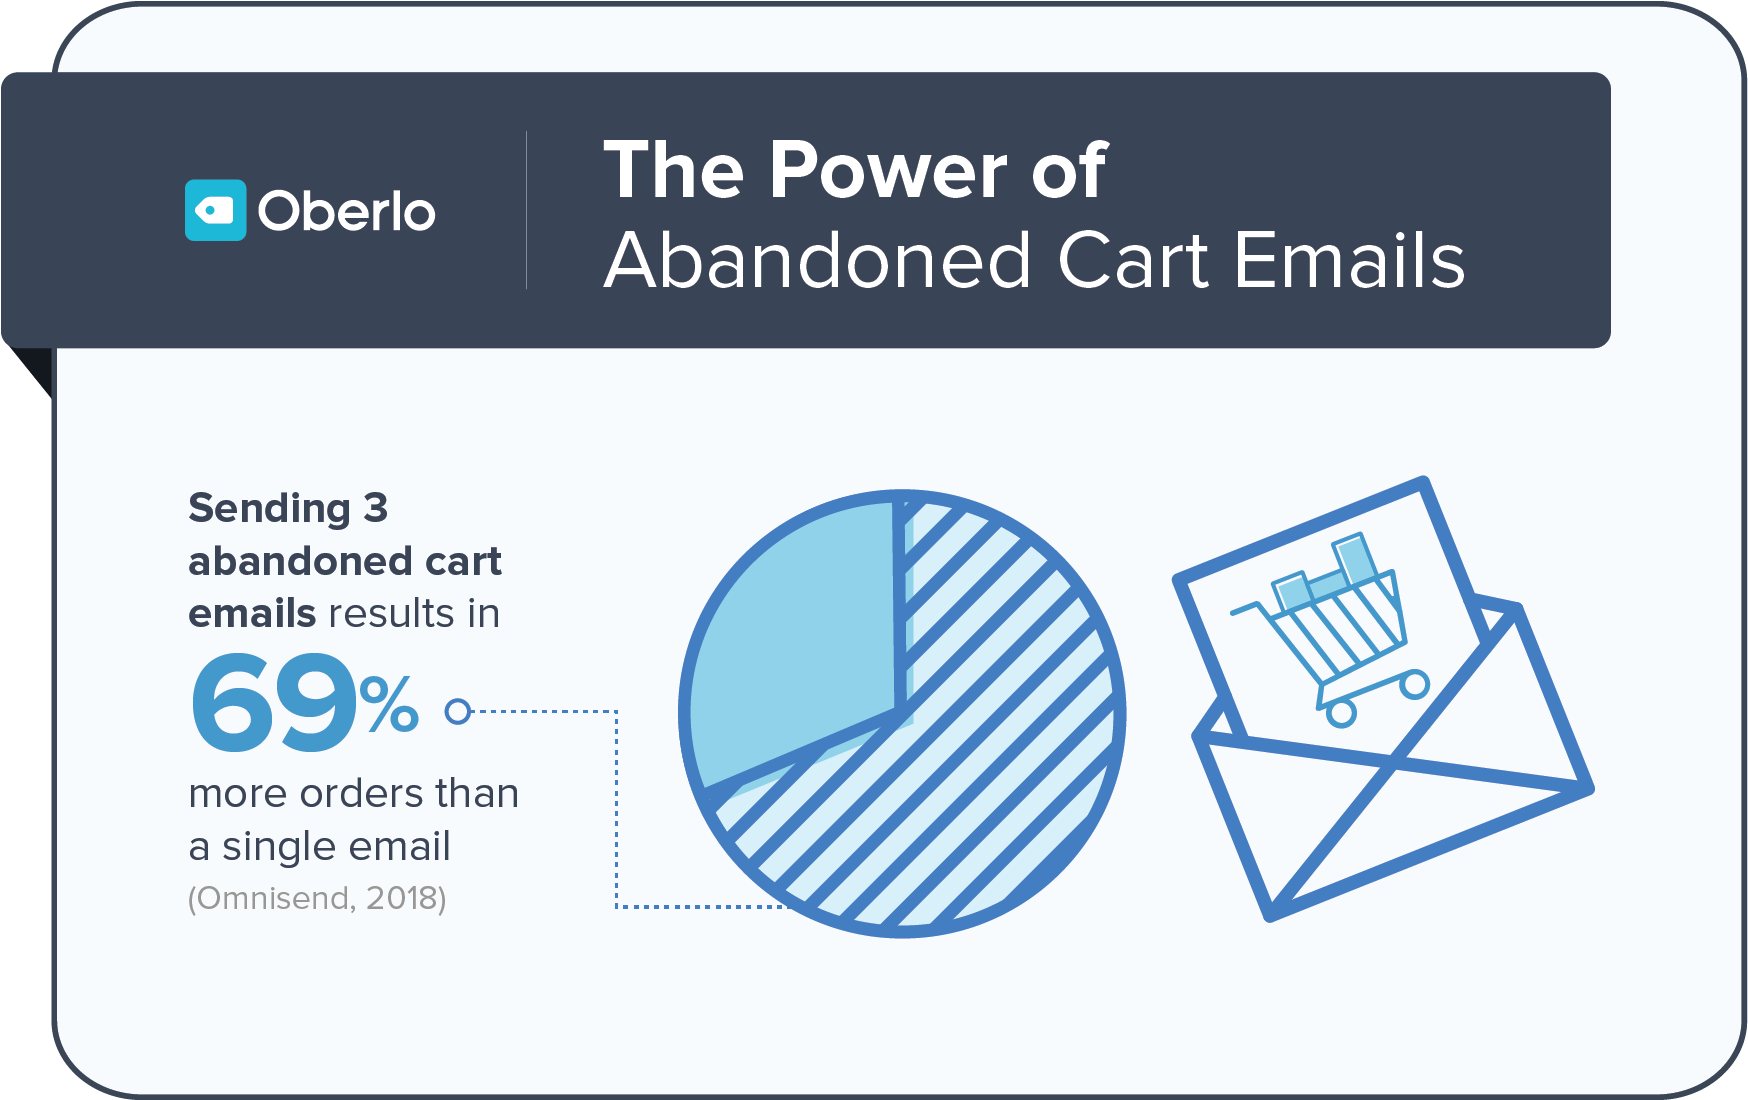 Oberlo Abandoned Cart Email Chart, Based on Omnisend Statistics